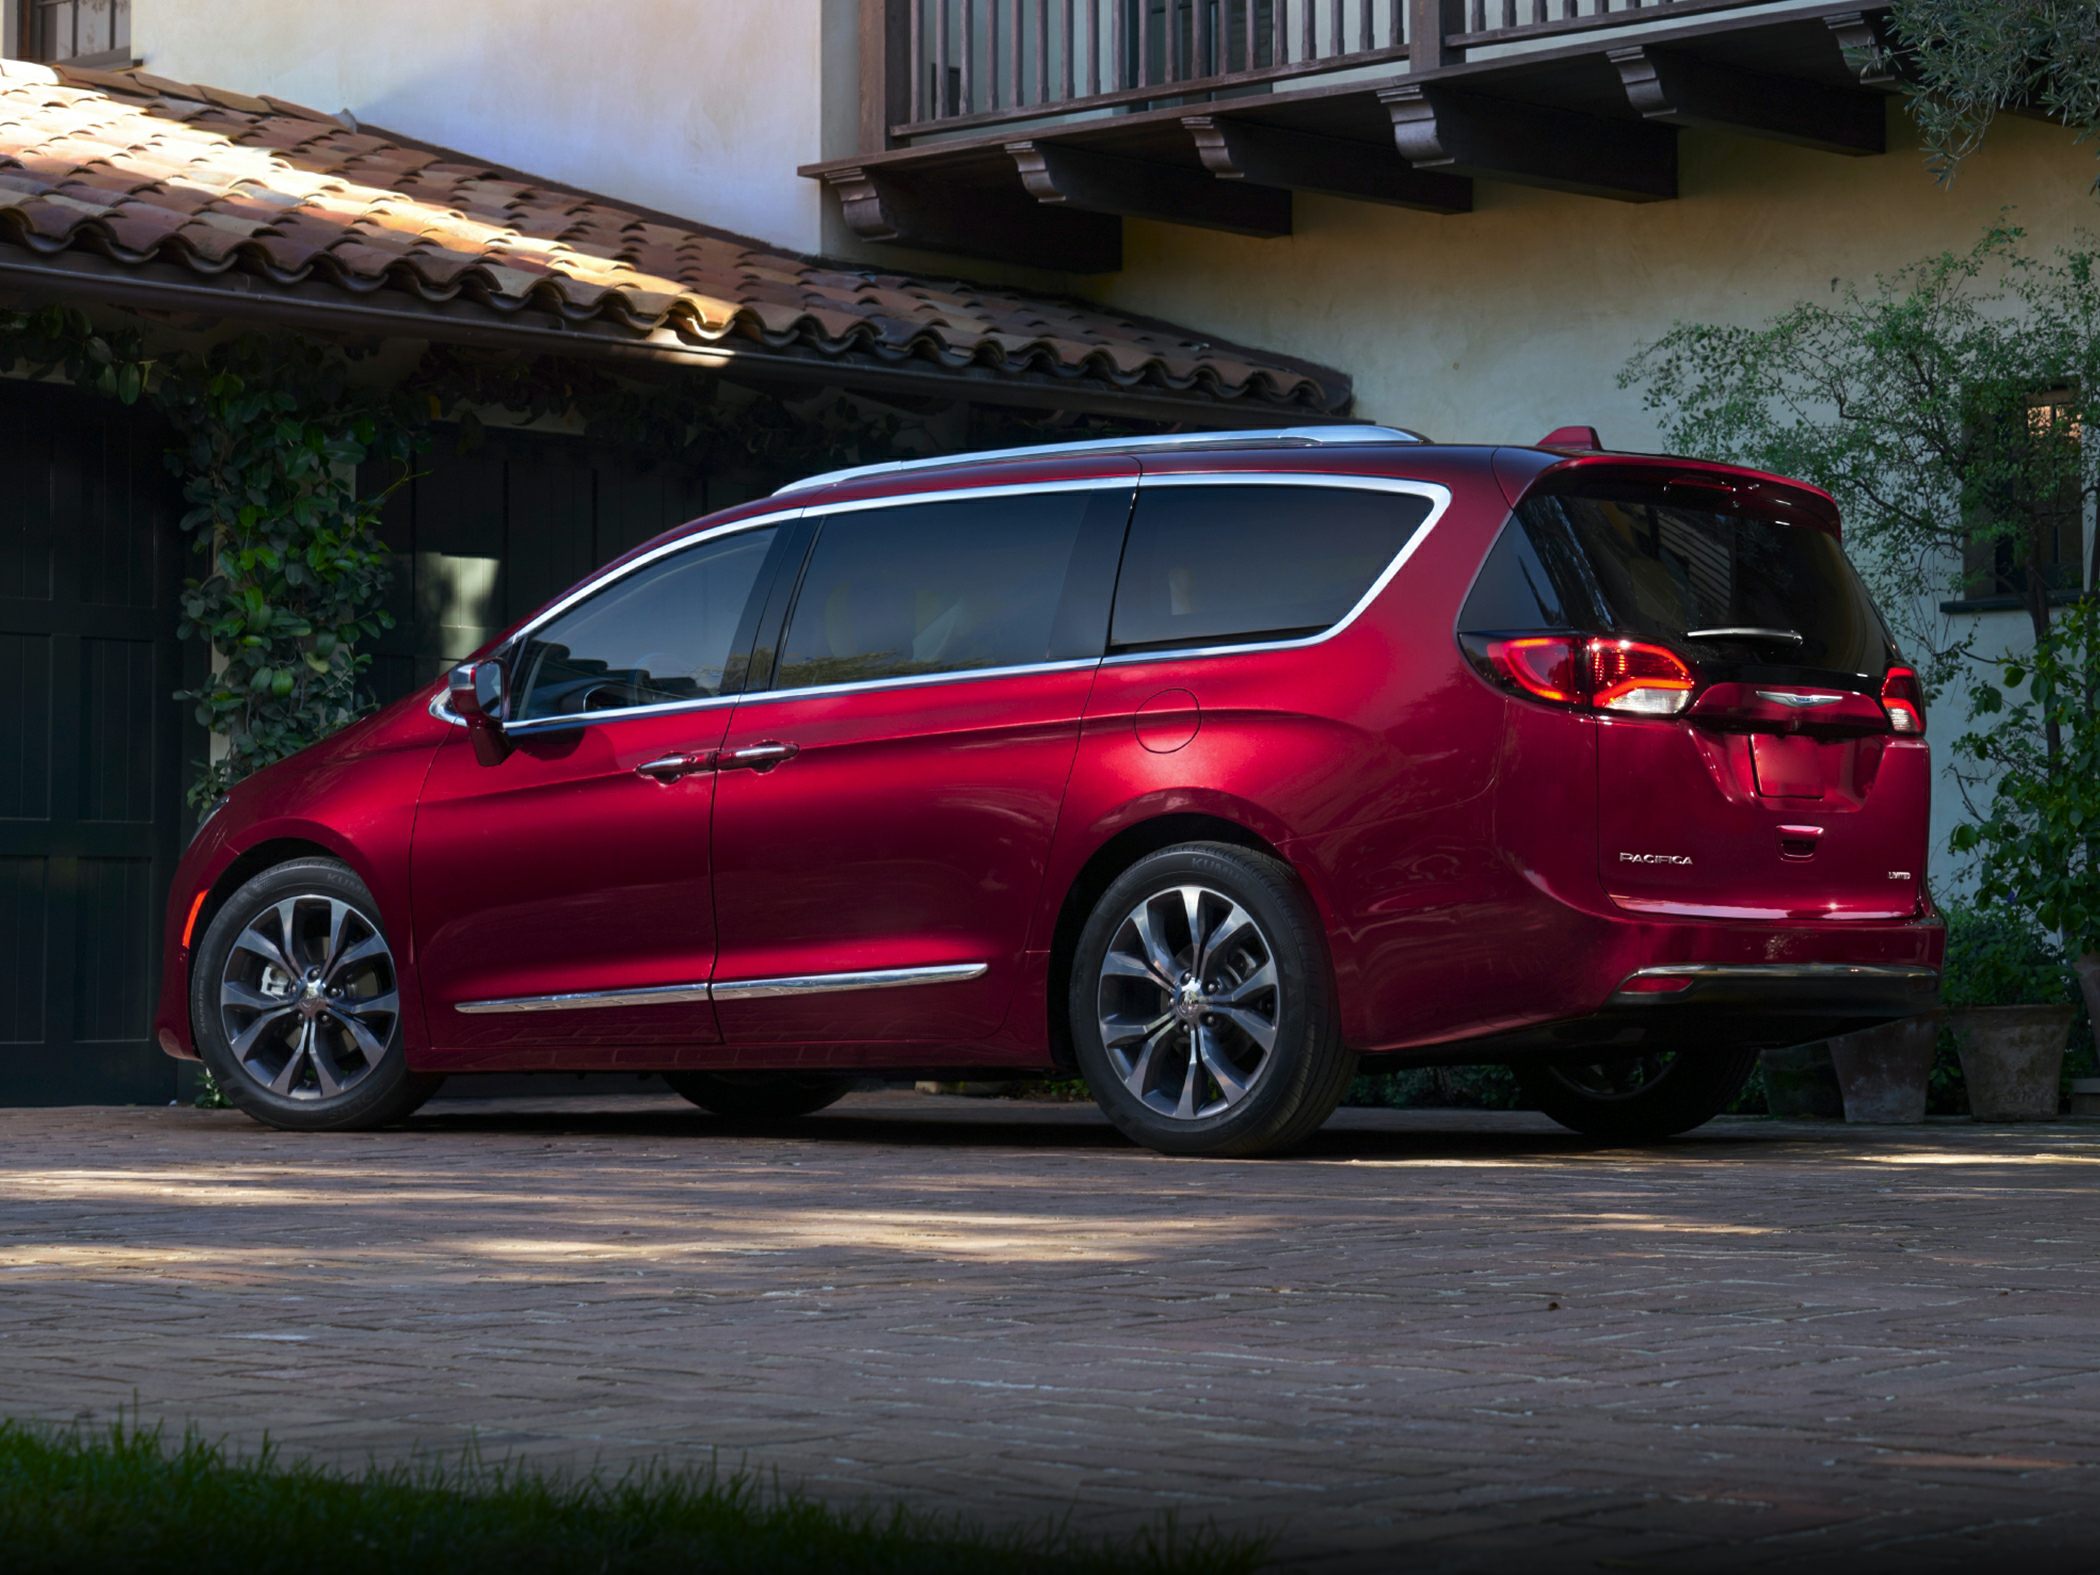 2020 Chrysler Pacifica Deals Prices Incentives Leases Overview 